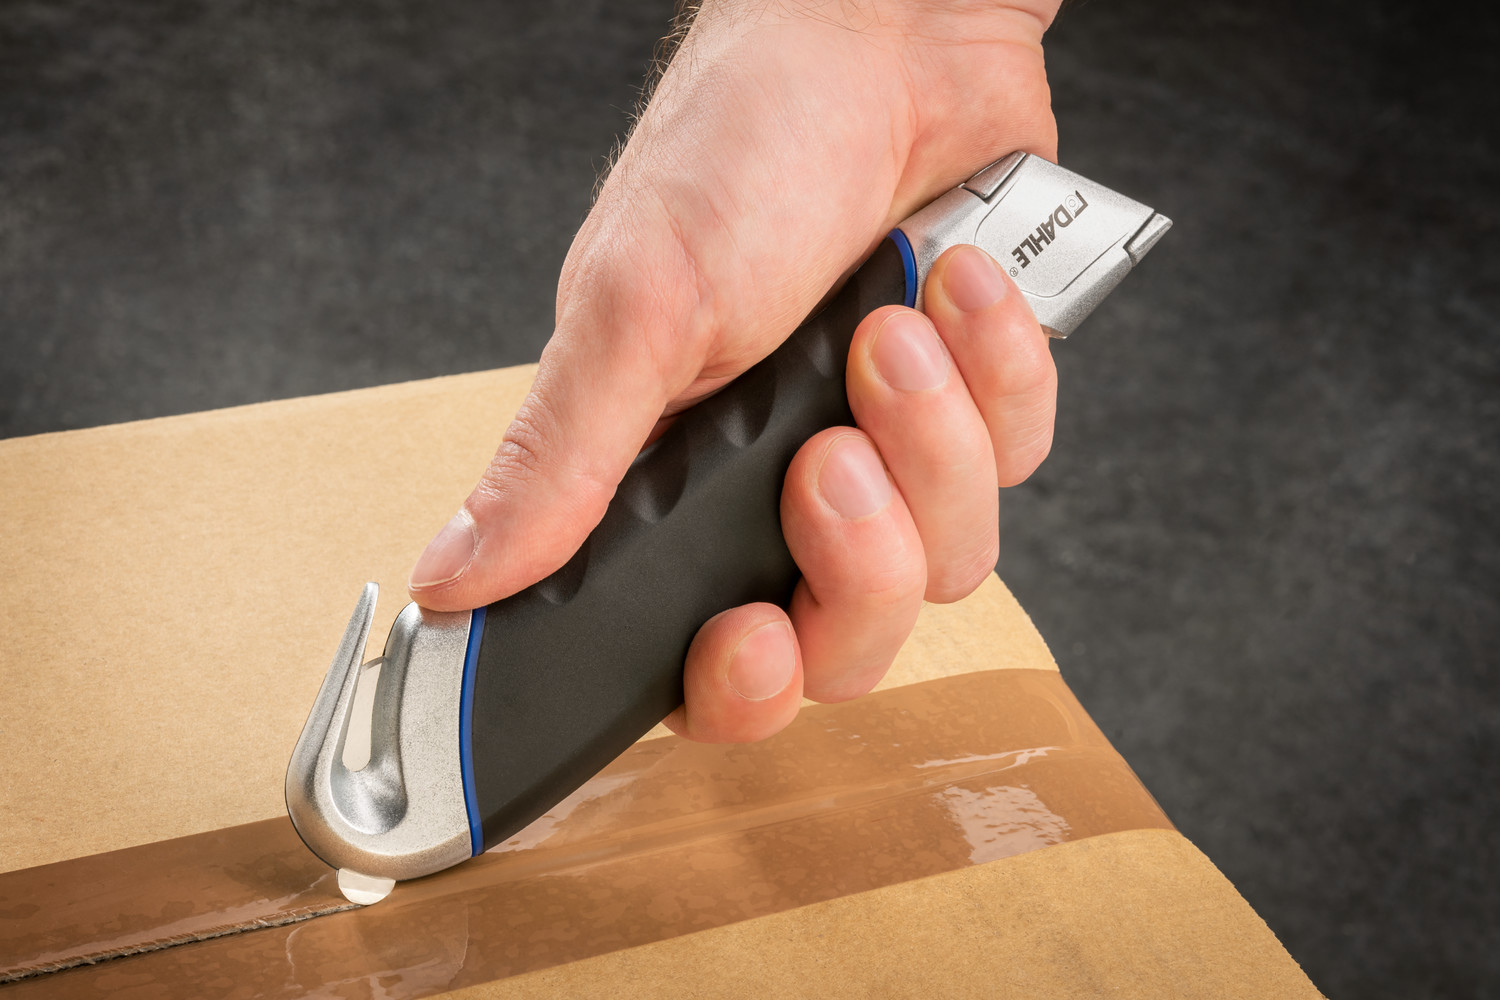 Perfect for delicate contents: the integrated foil cutter opens packages especially gently